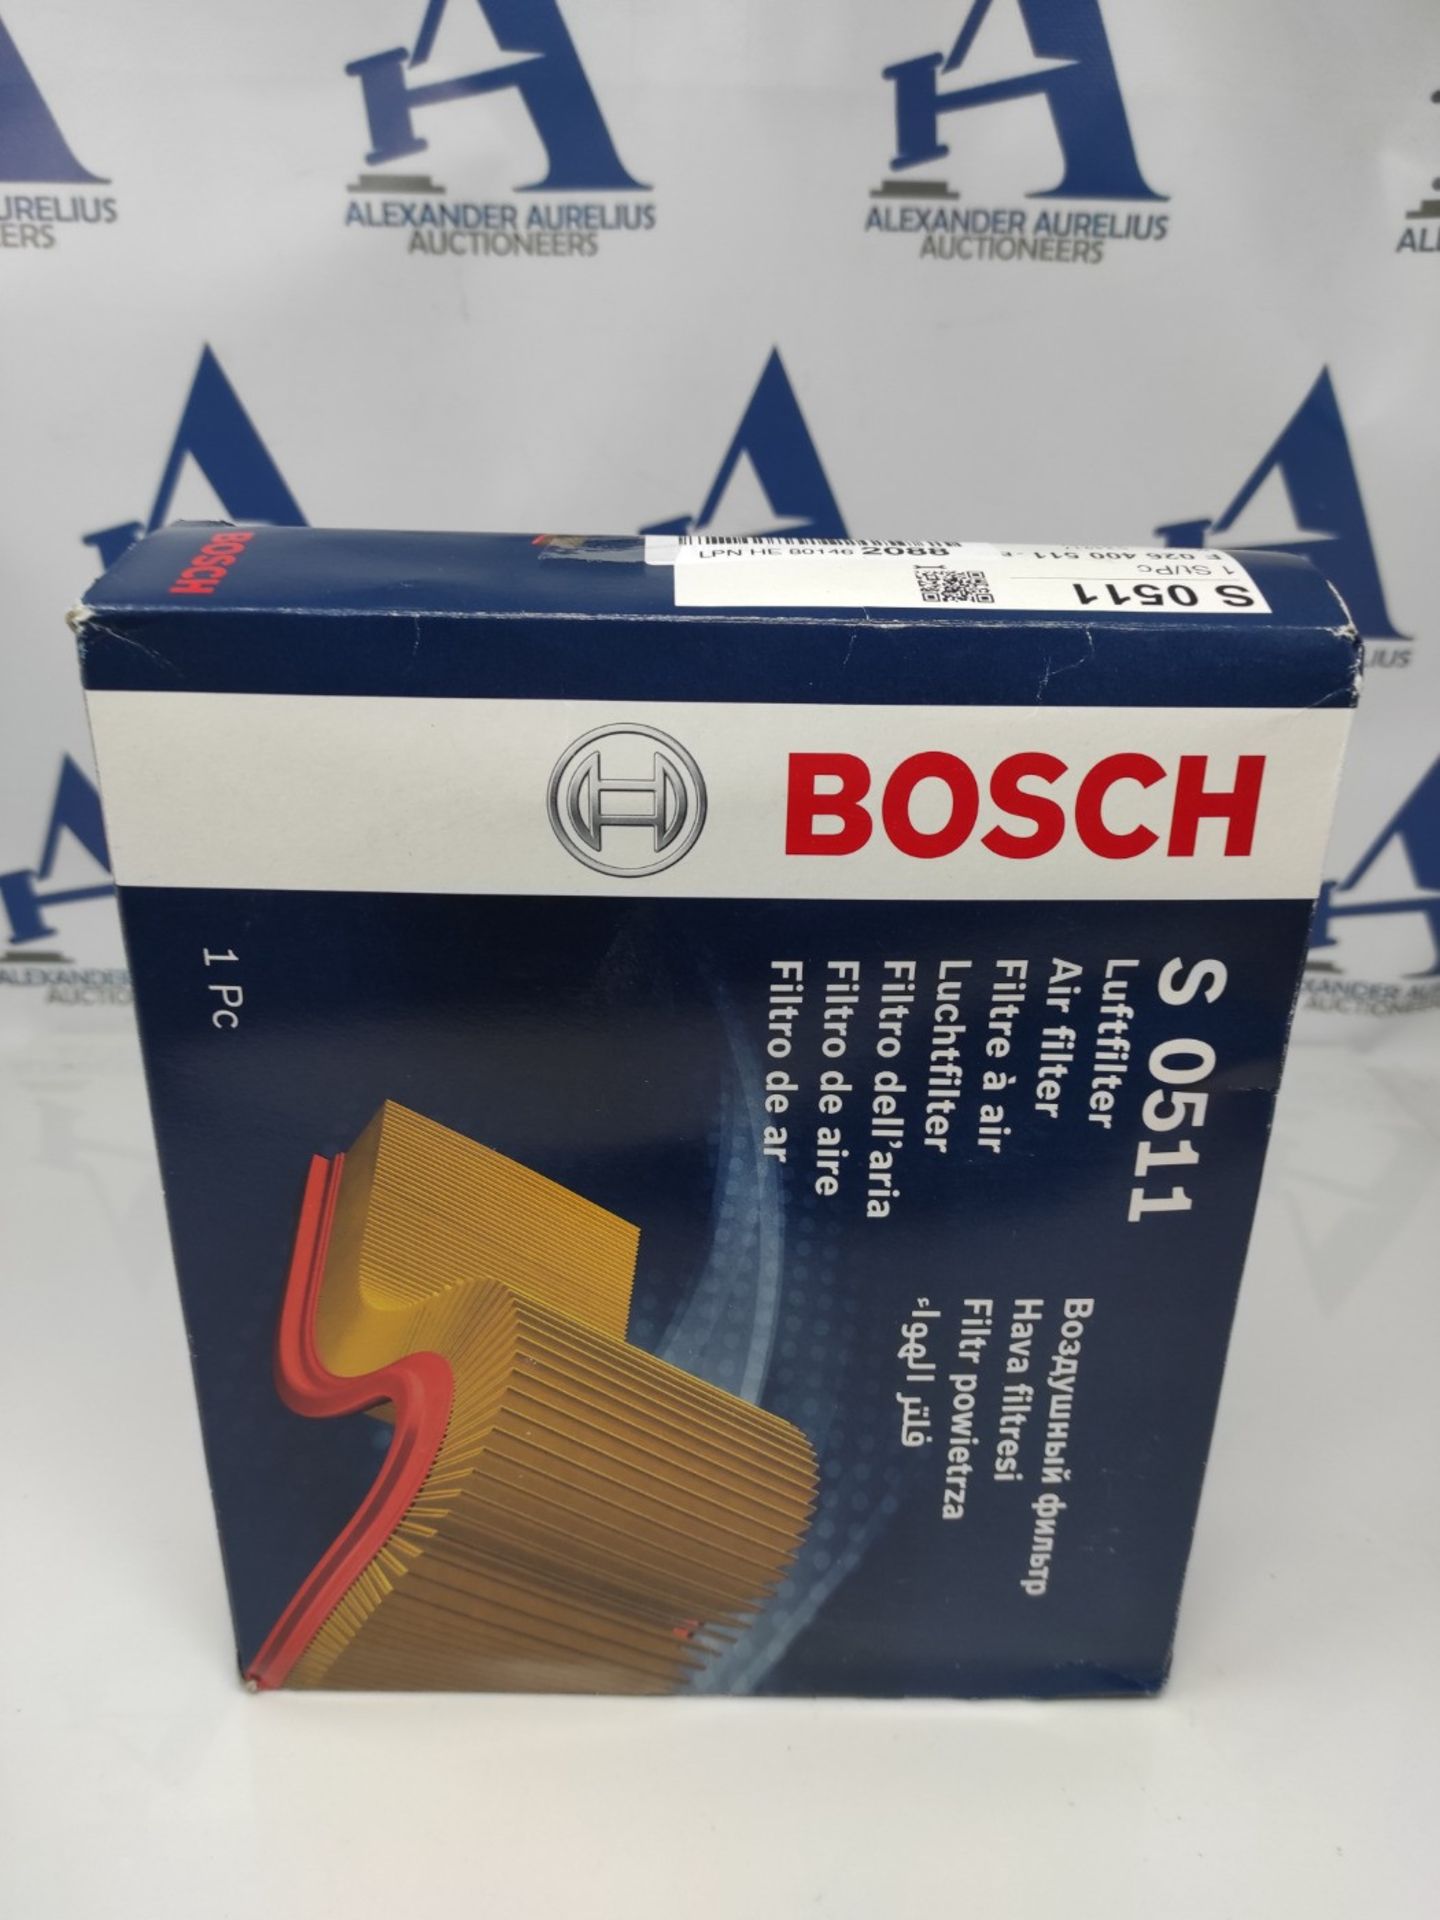 Bosch S0511 - Automotive Air Filter - Image 2 of 3